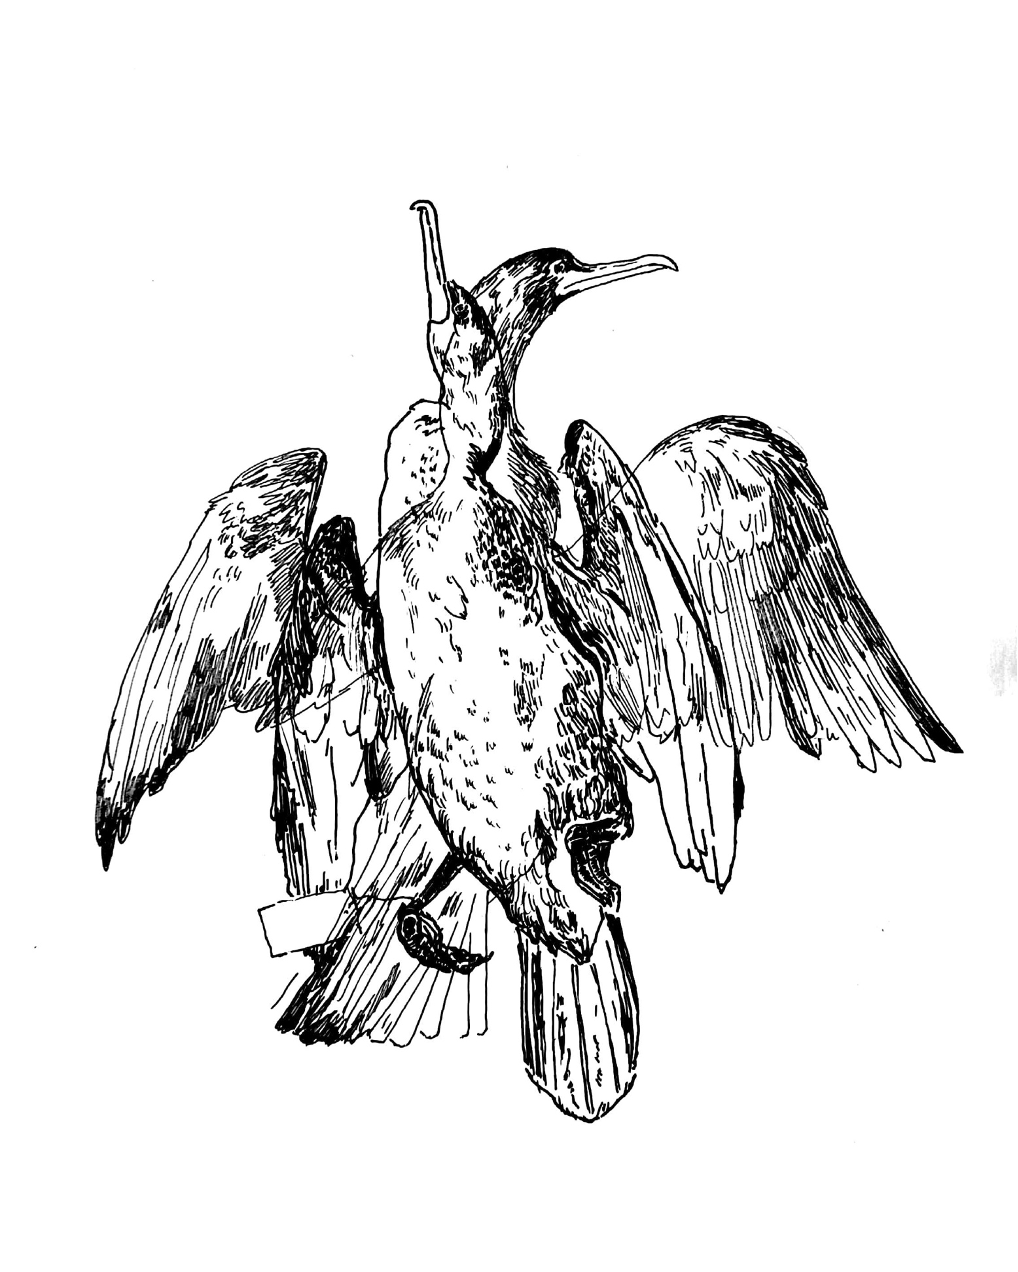 Black and white illustration of two cormorants.